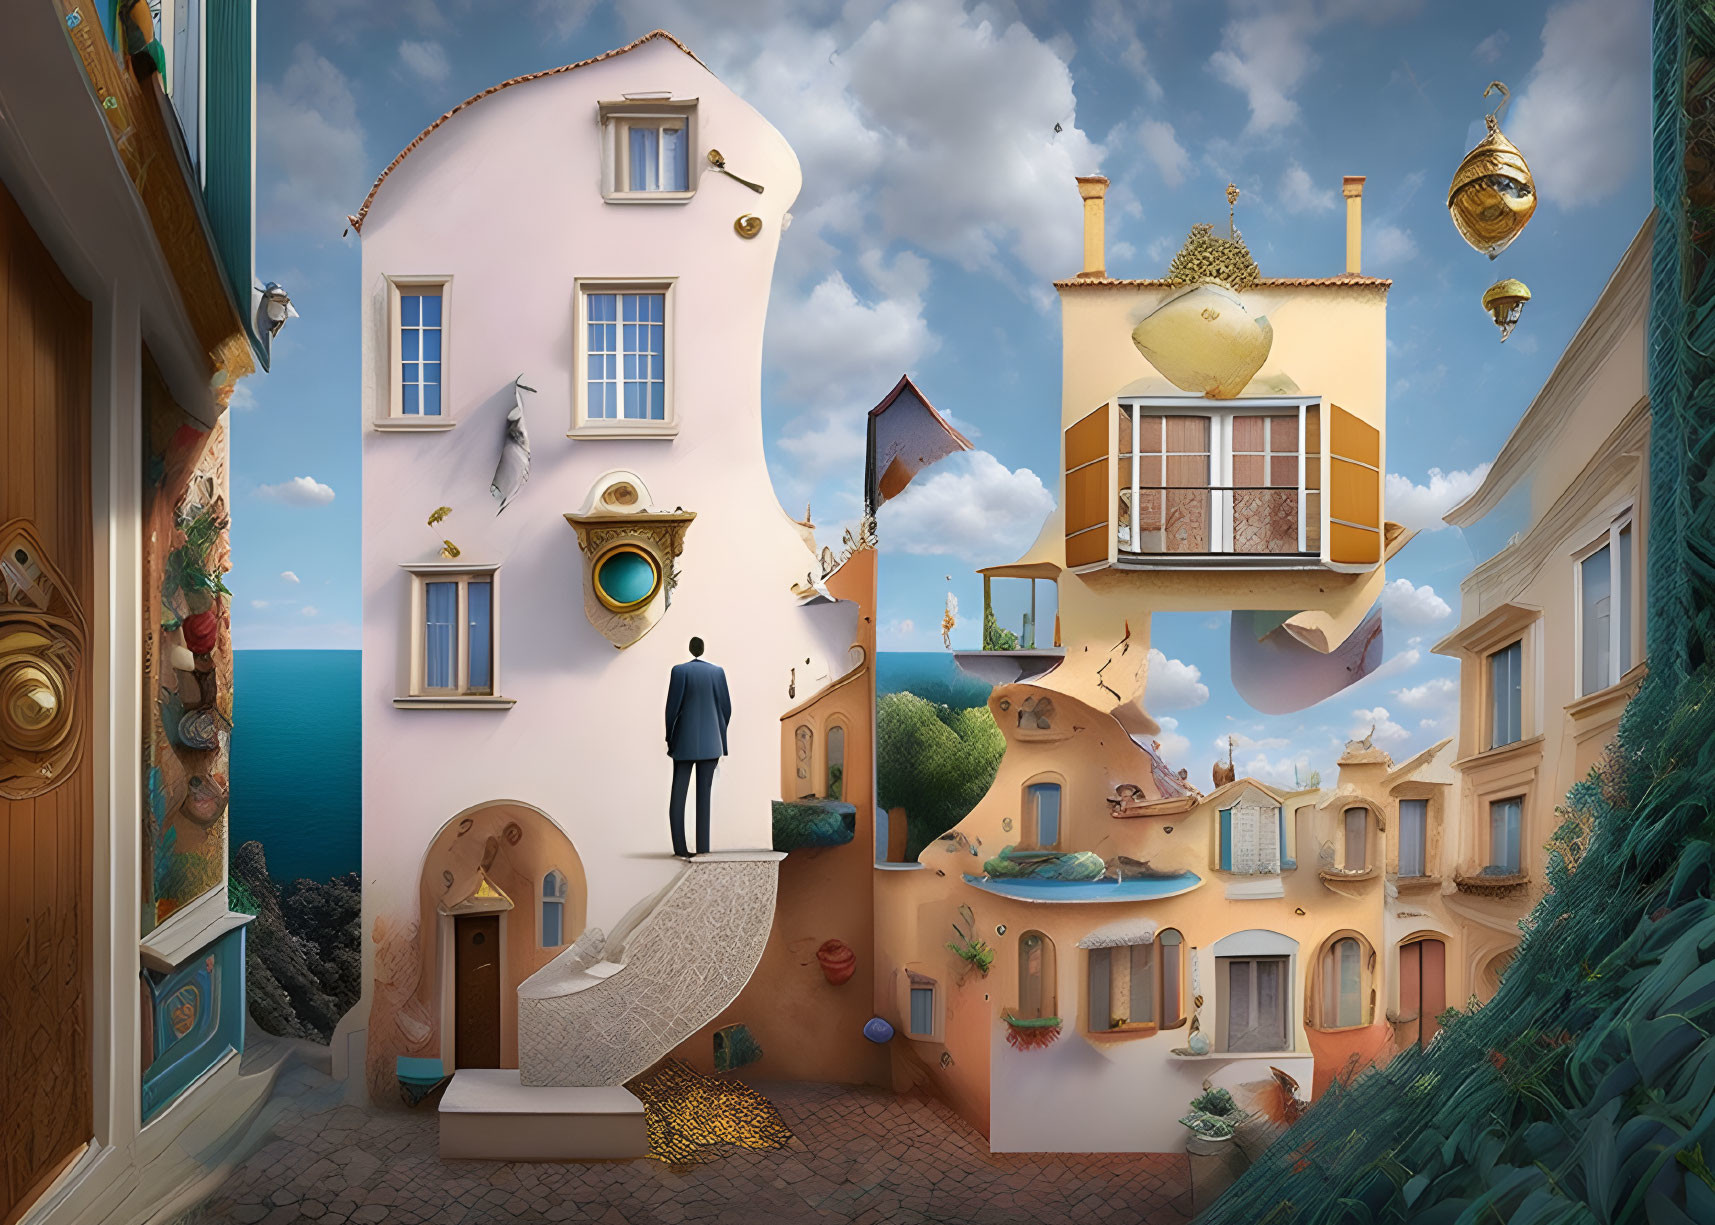 Surrealistic image of man on staircase to floating building